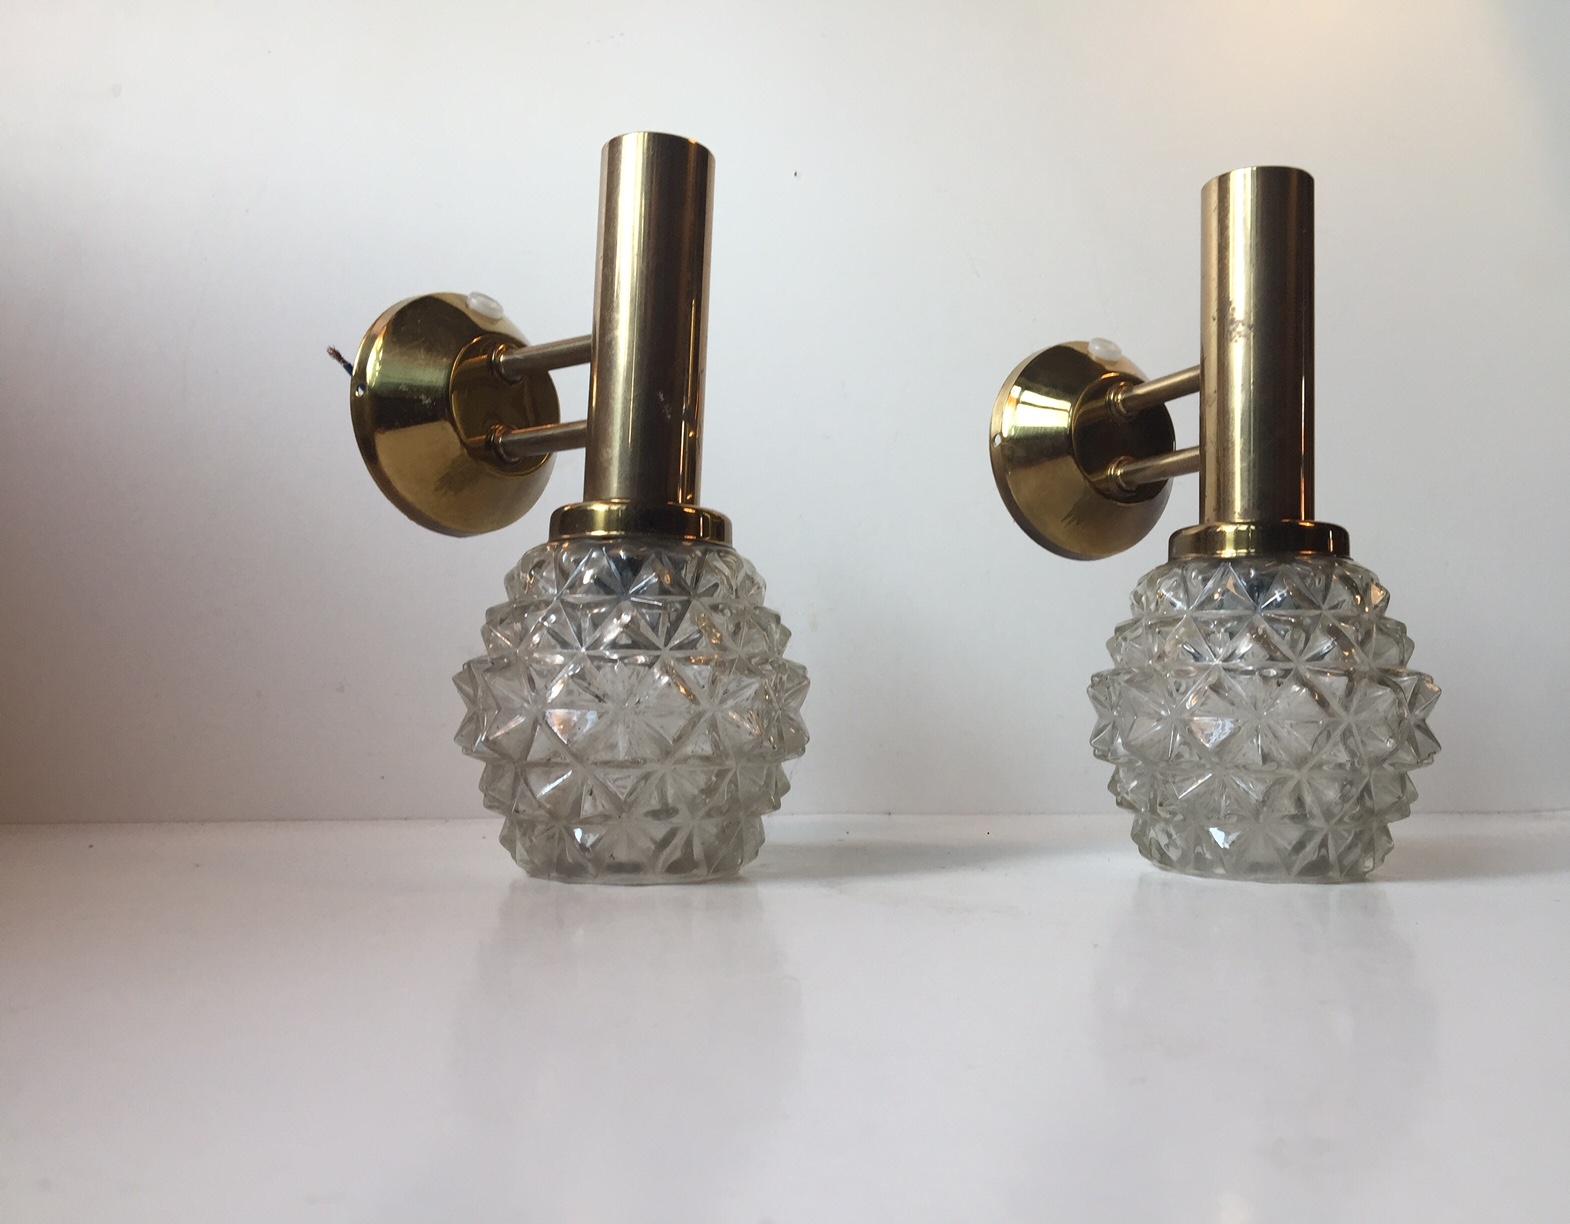 A pair of granat-shaped sconces in pressed clear glass and brass. Anonymously manufactured in Scandinavia during the 1960s in a style reminiscent of Carl Fagerlund, Hans Agne Jakobsson and CT. Kalmar.